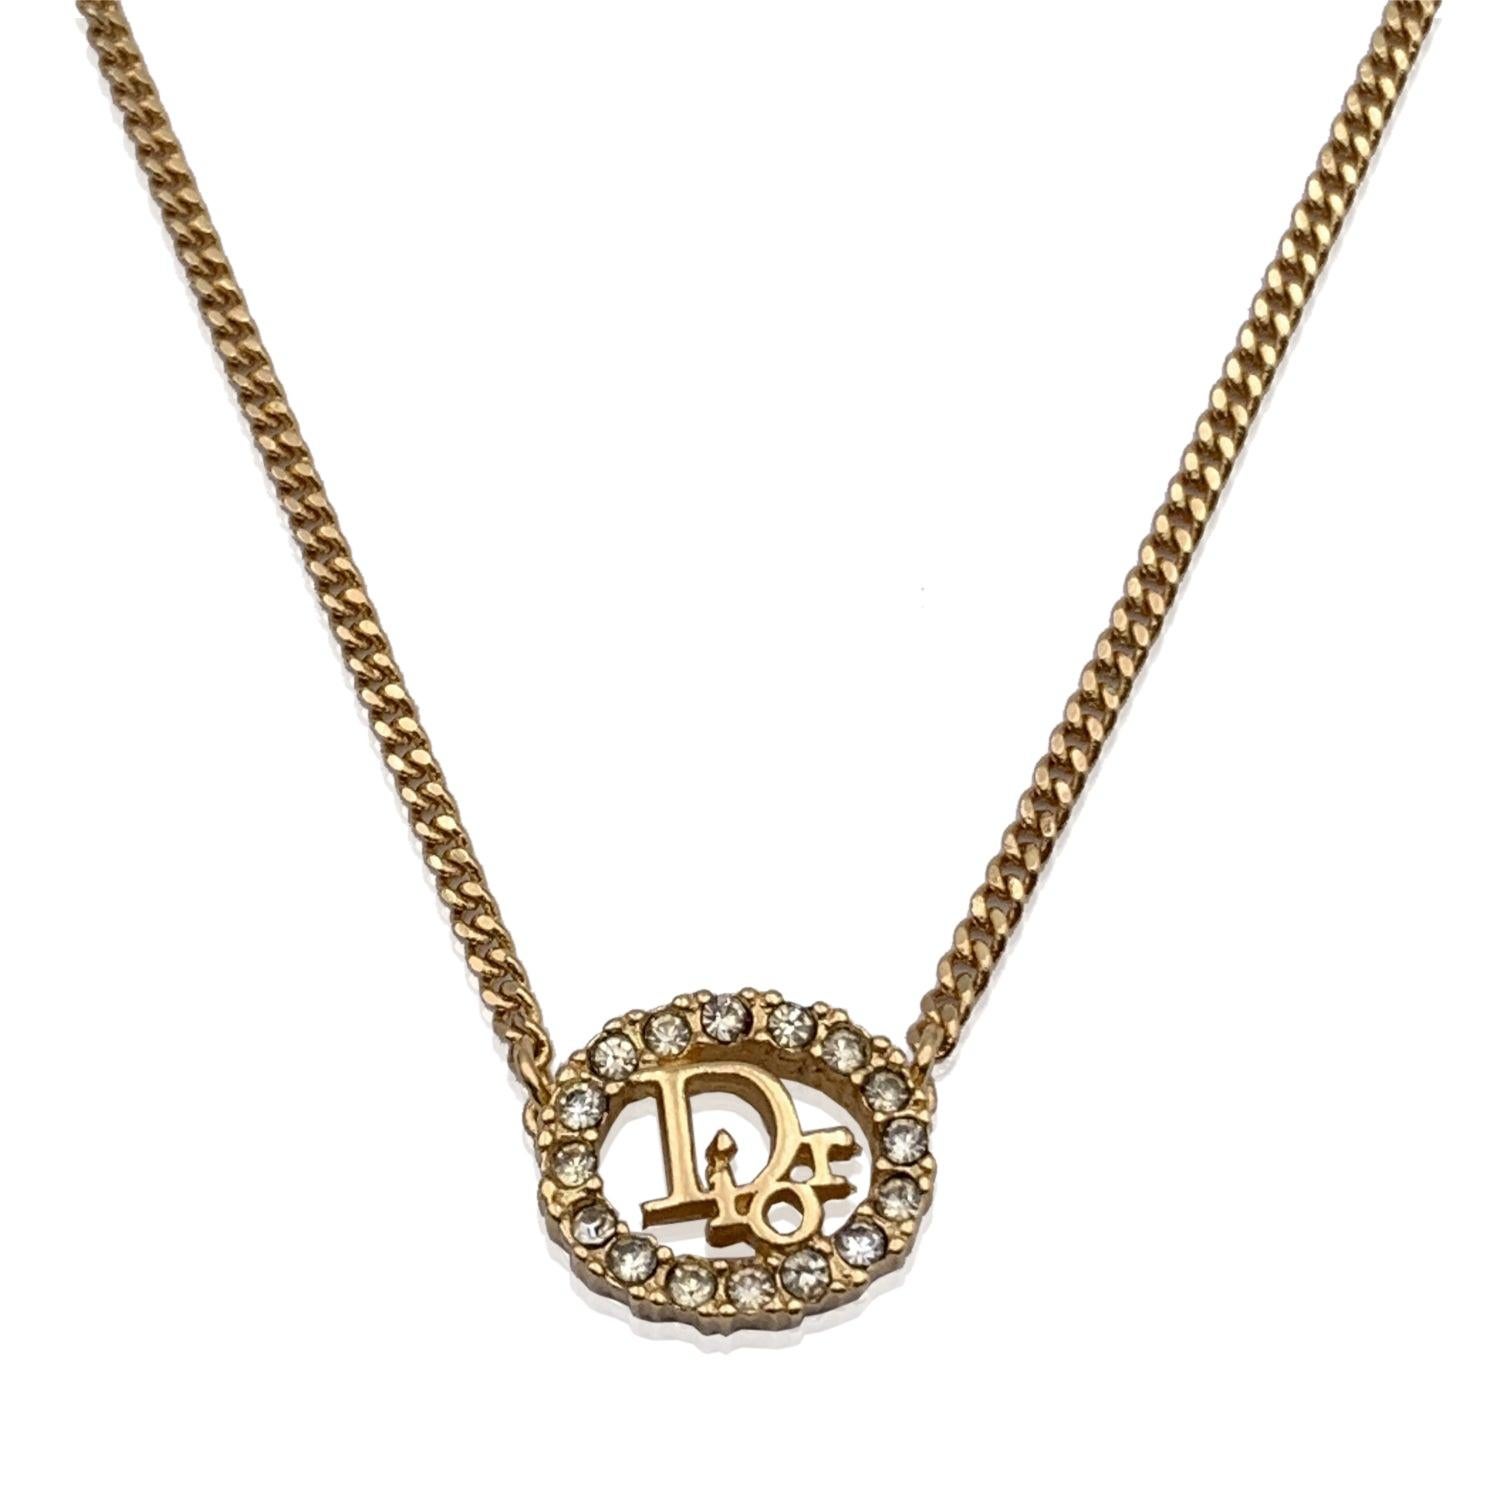 christian dior jewelry necklace